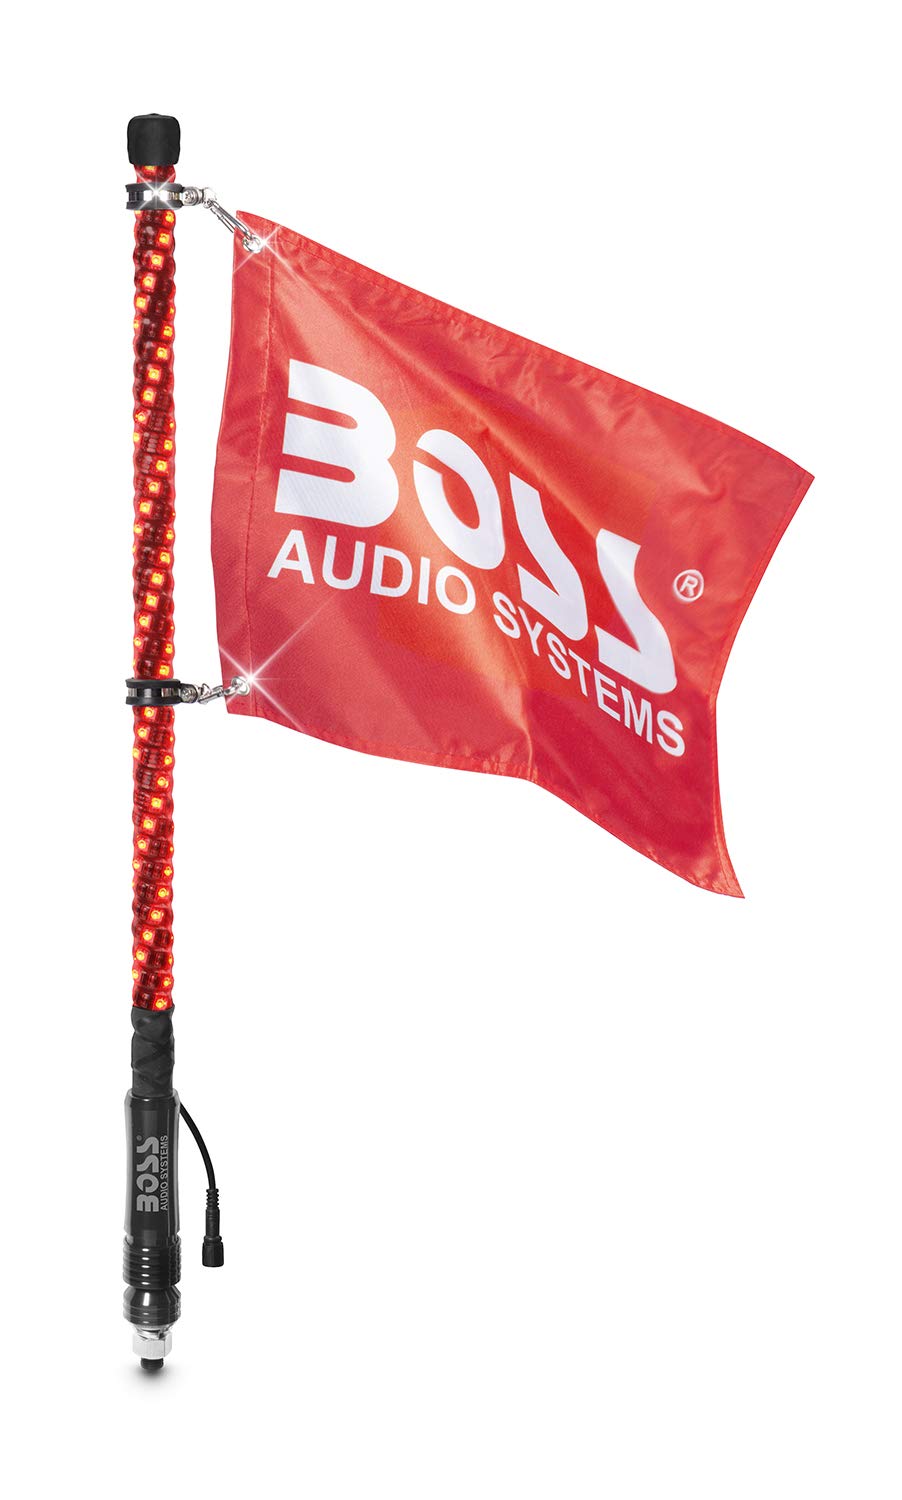 Boss Audio Systems WP2 Atv Whip Antenna - 24-Inch, 360-Degree Rgb (Red/Green/Blue)